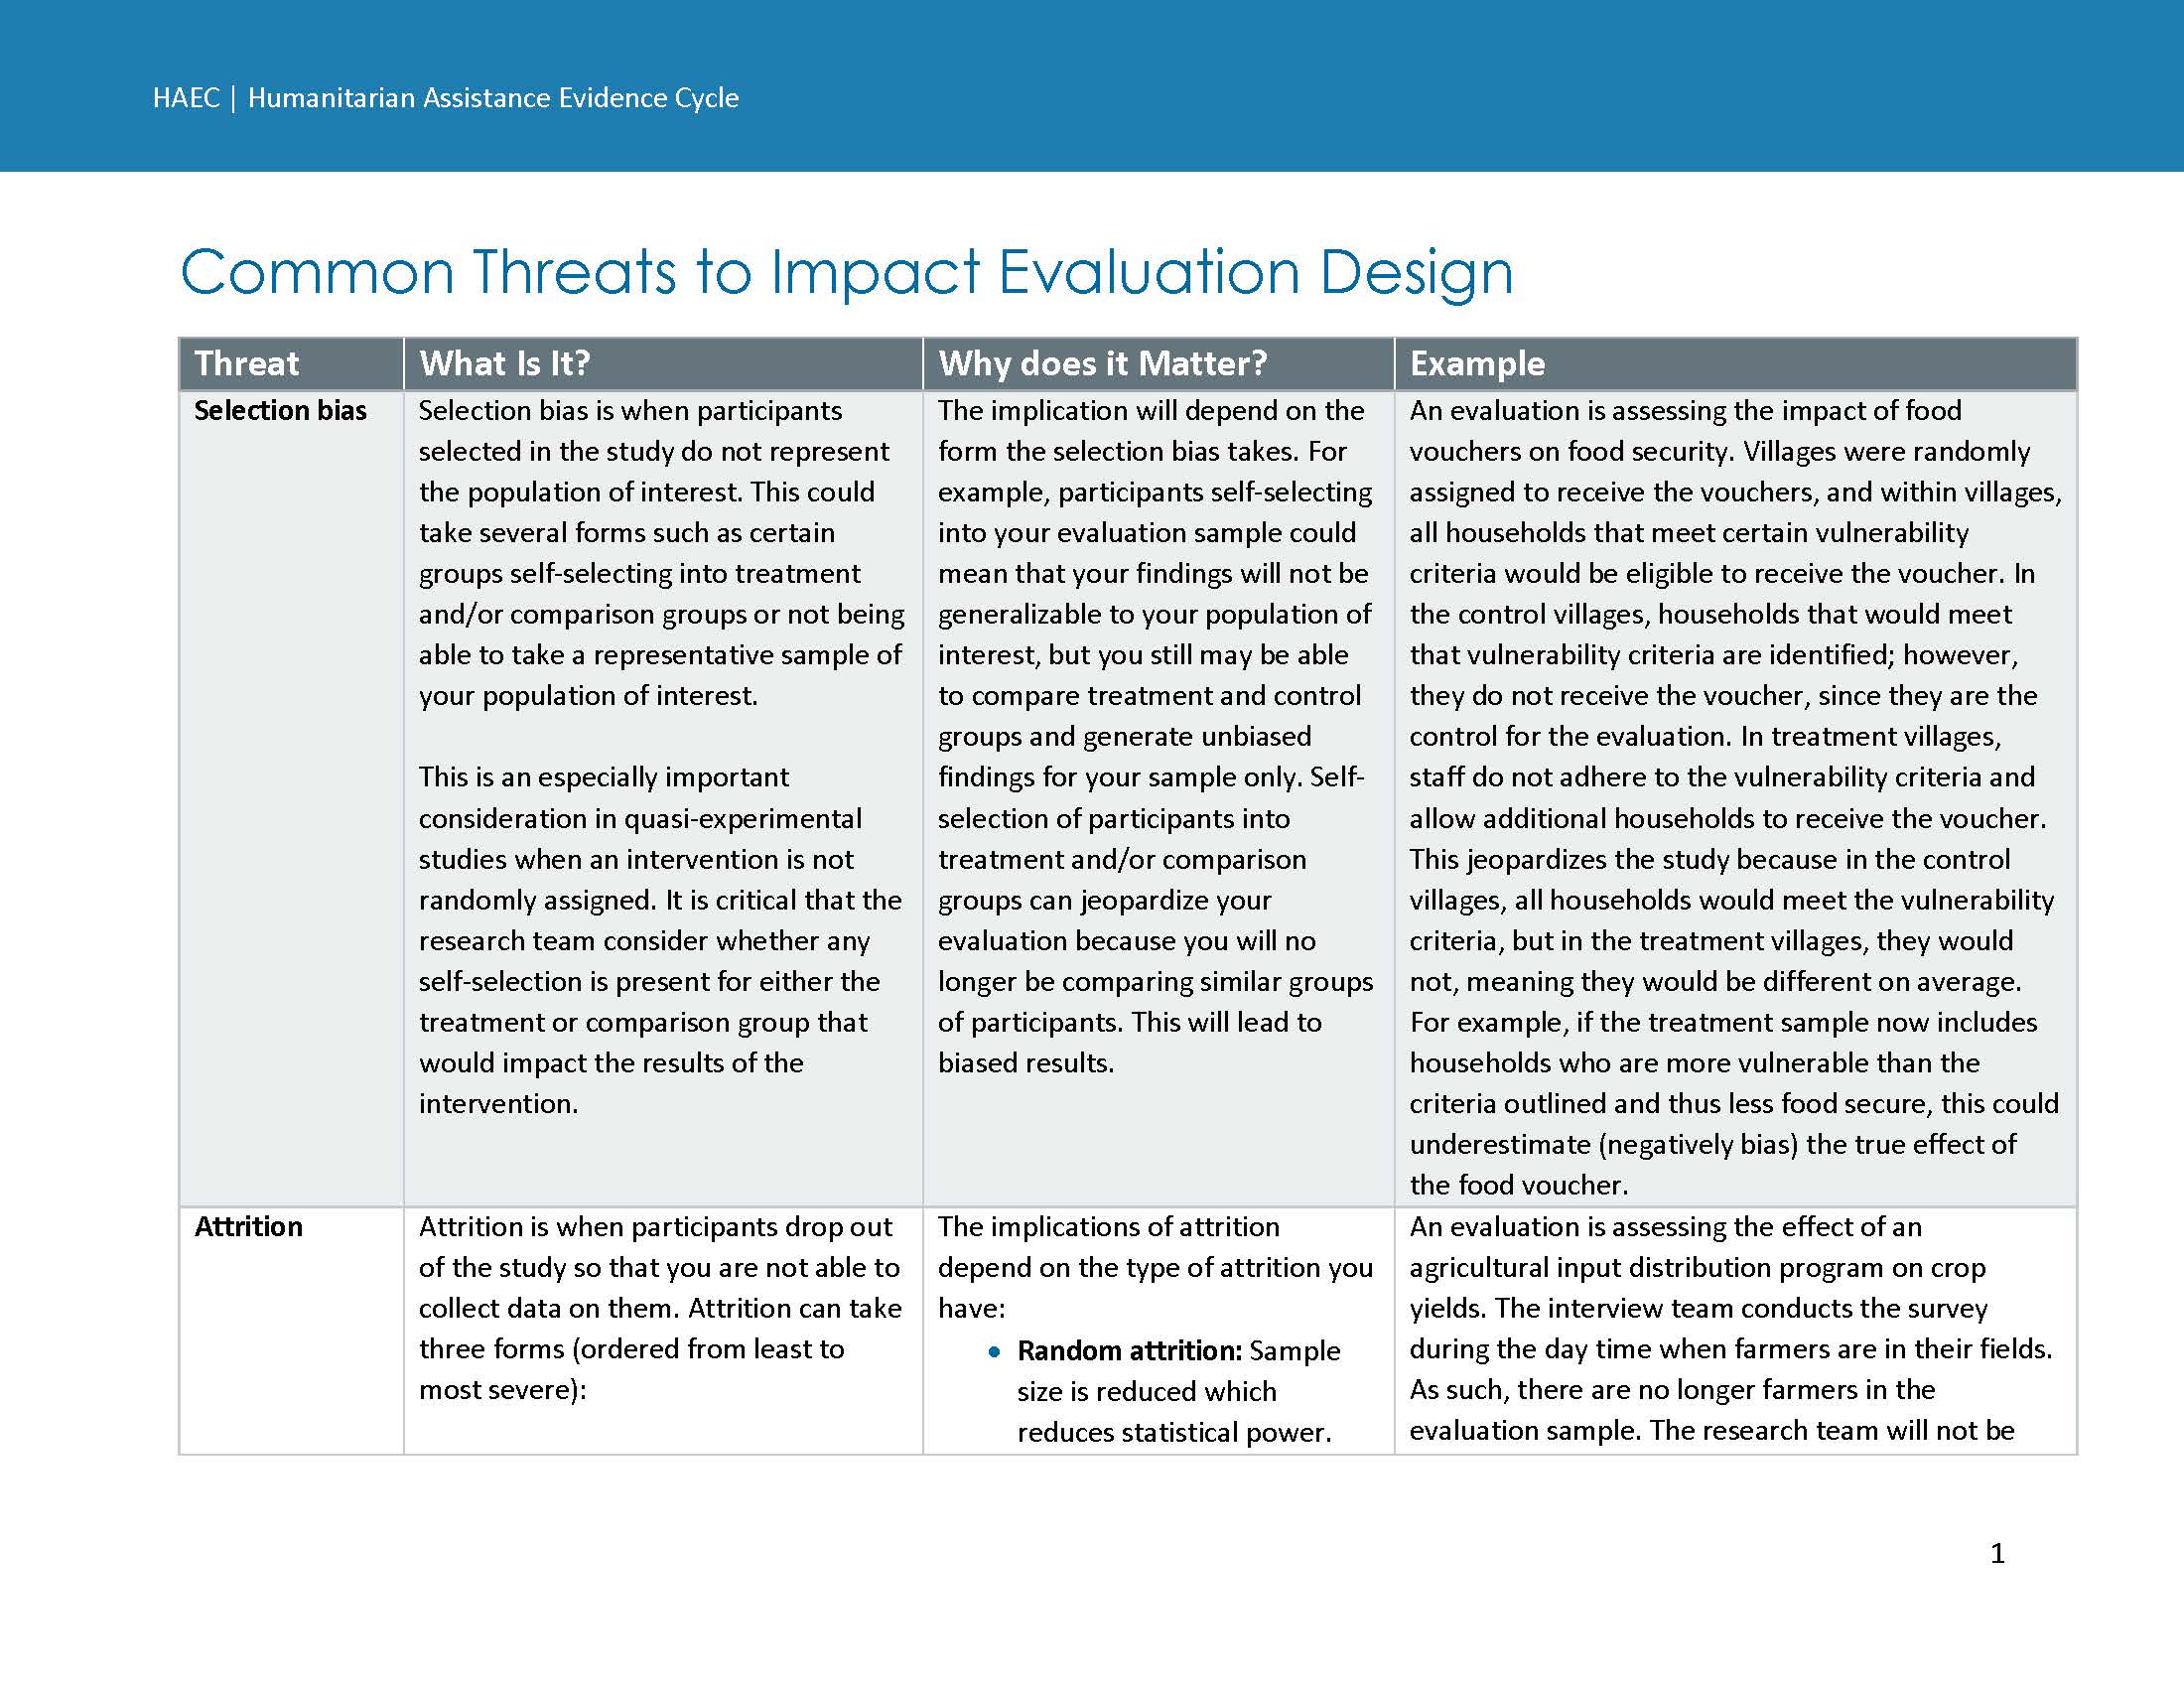 First page of brief shows previews the text from the document outlining common threats to impact evaluation designs